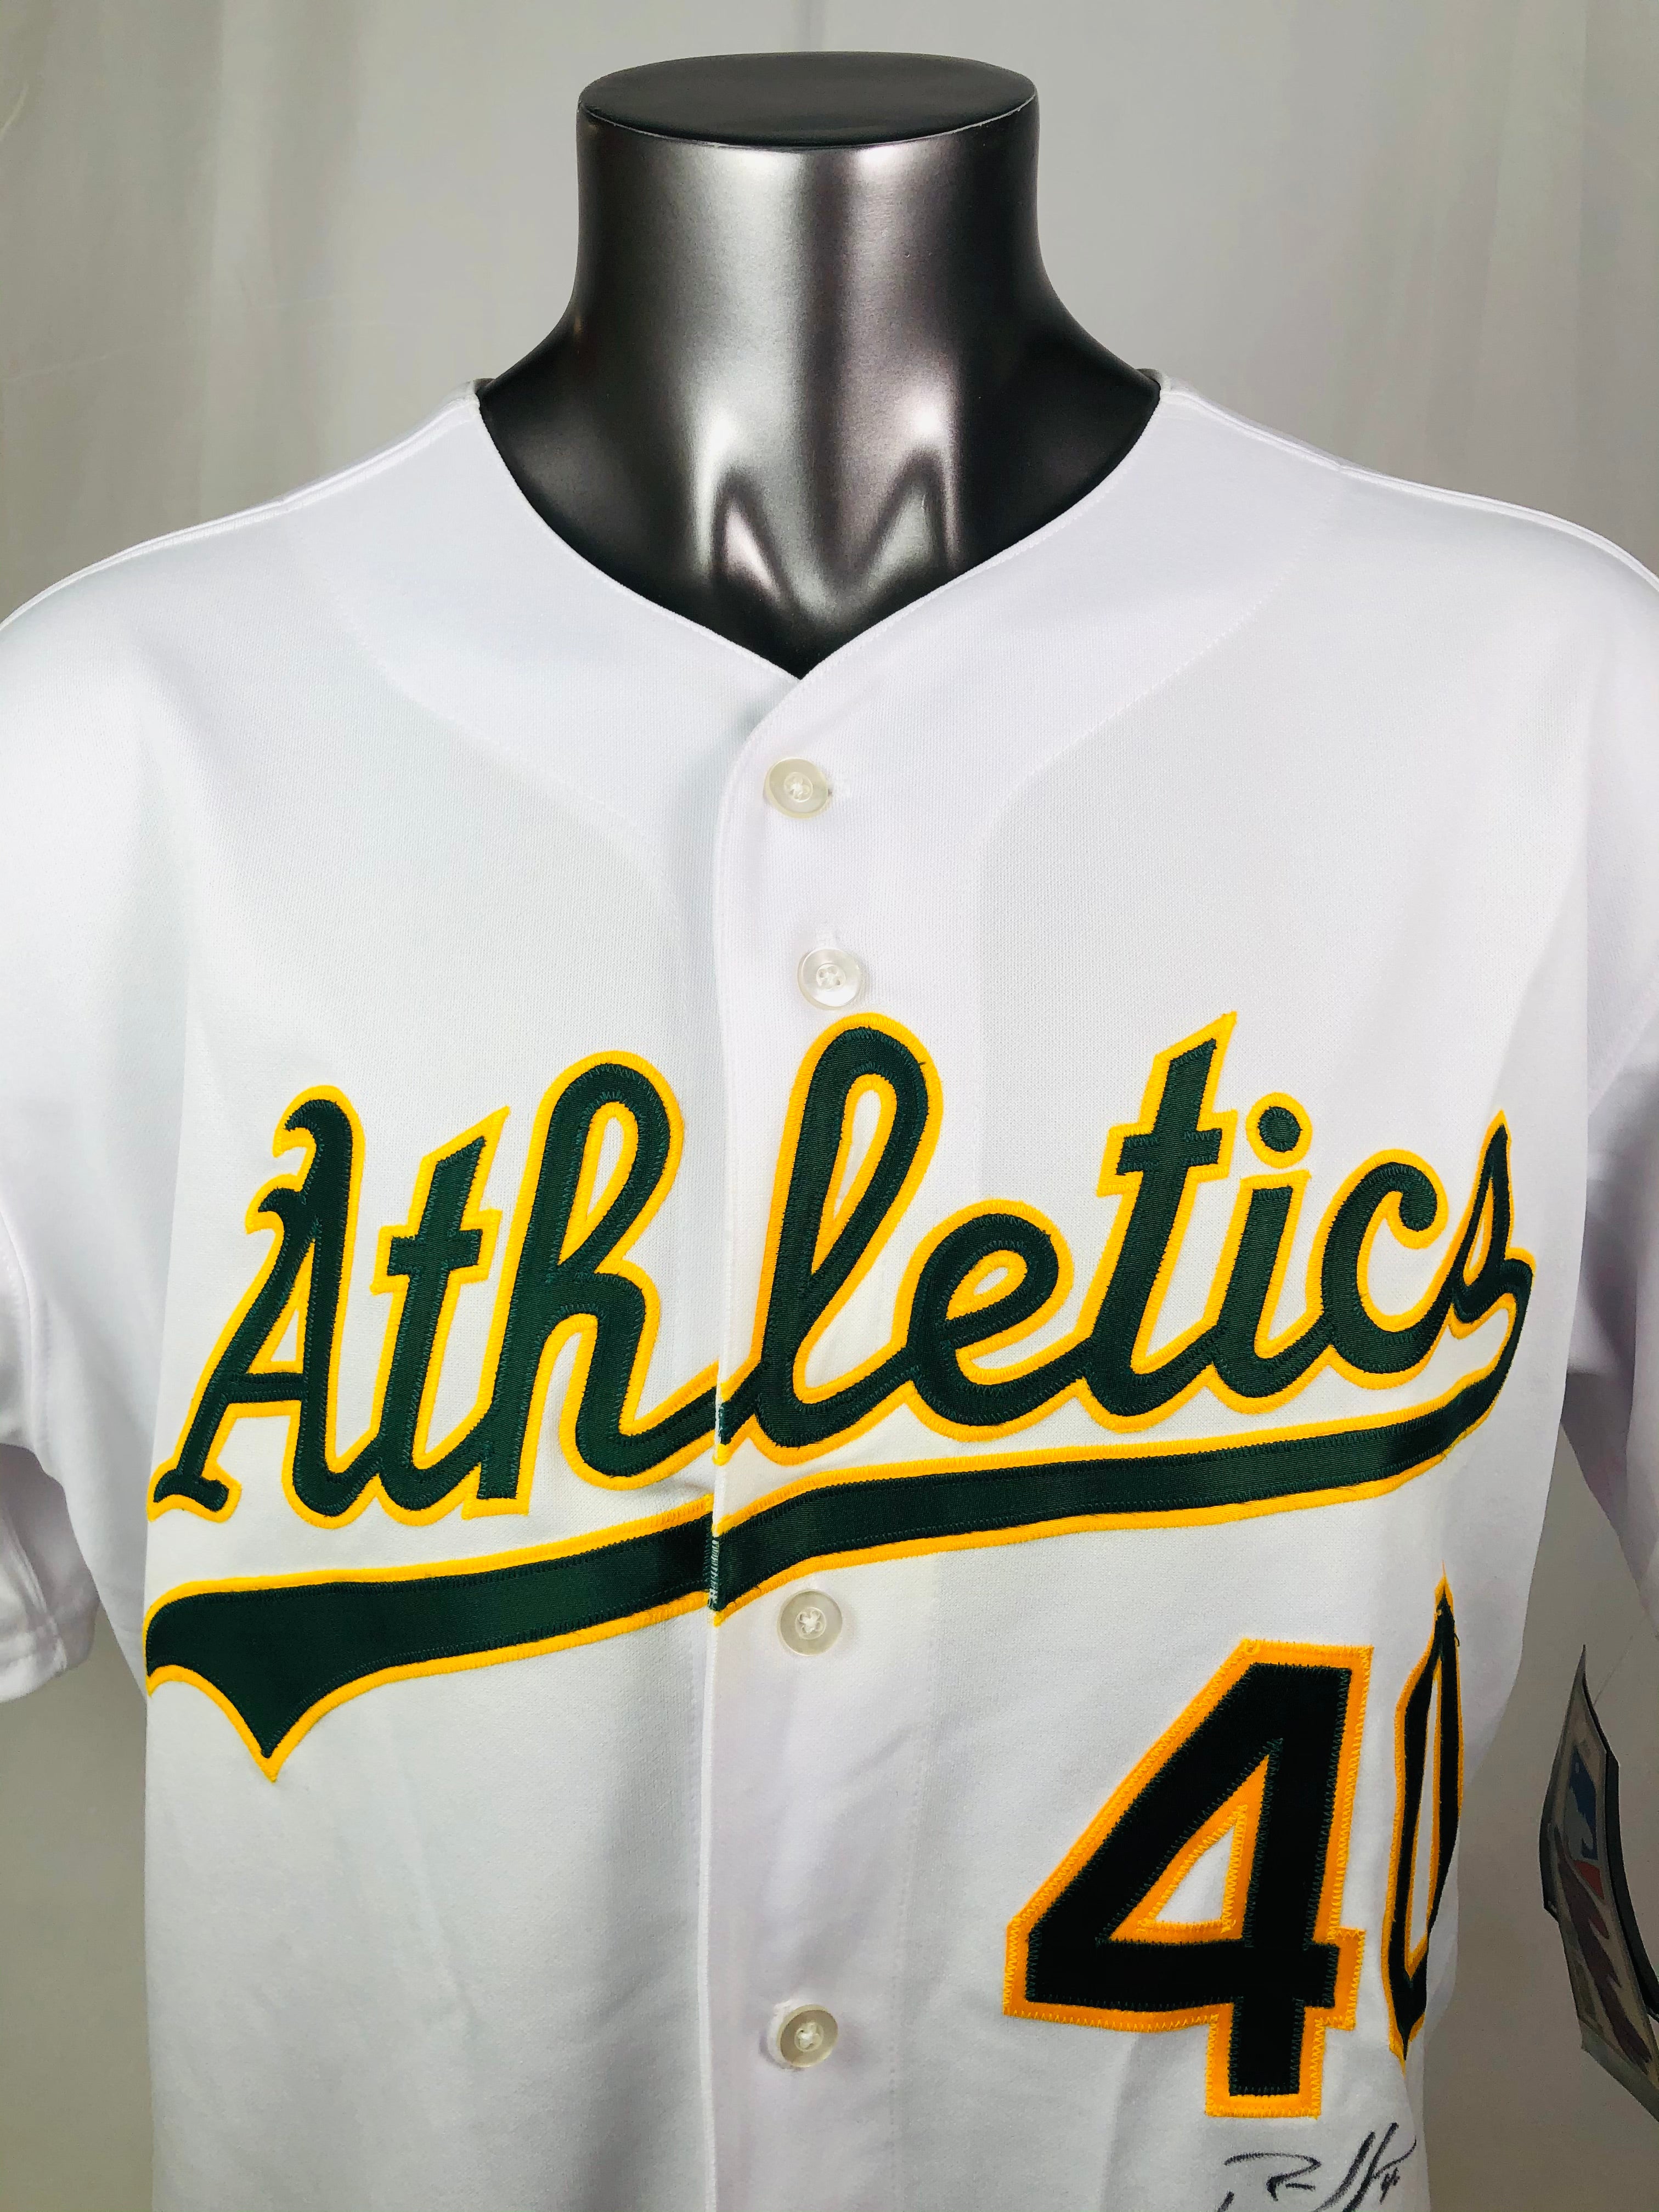 RICH HARDEN OAKLAND ATHLETICS VINTAGE 2000'S TEAM ISSUED SIGNED AUTHEN -  Bucks County Baseball Co.